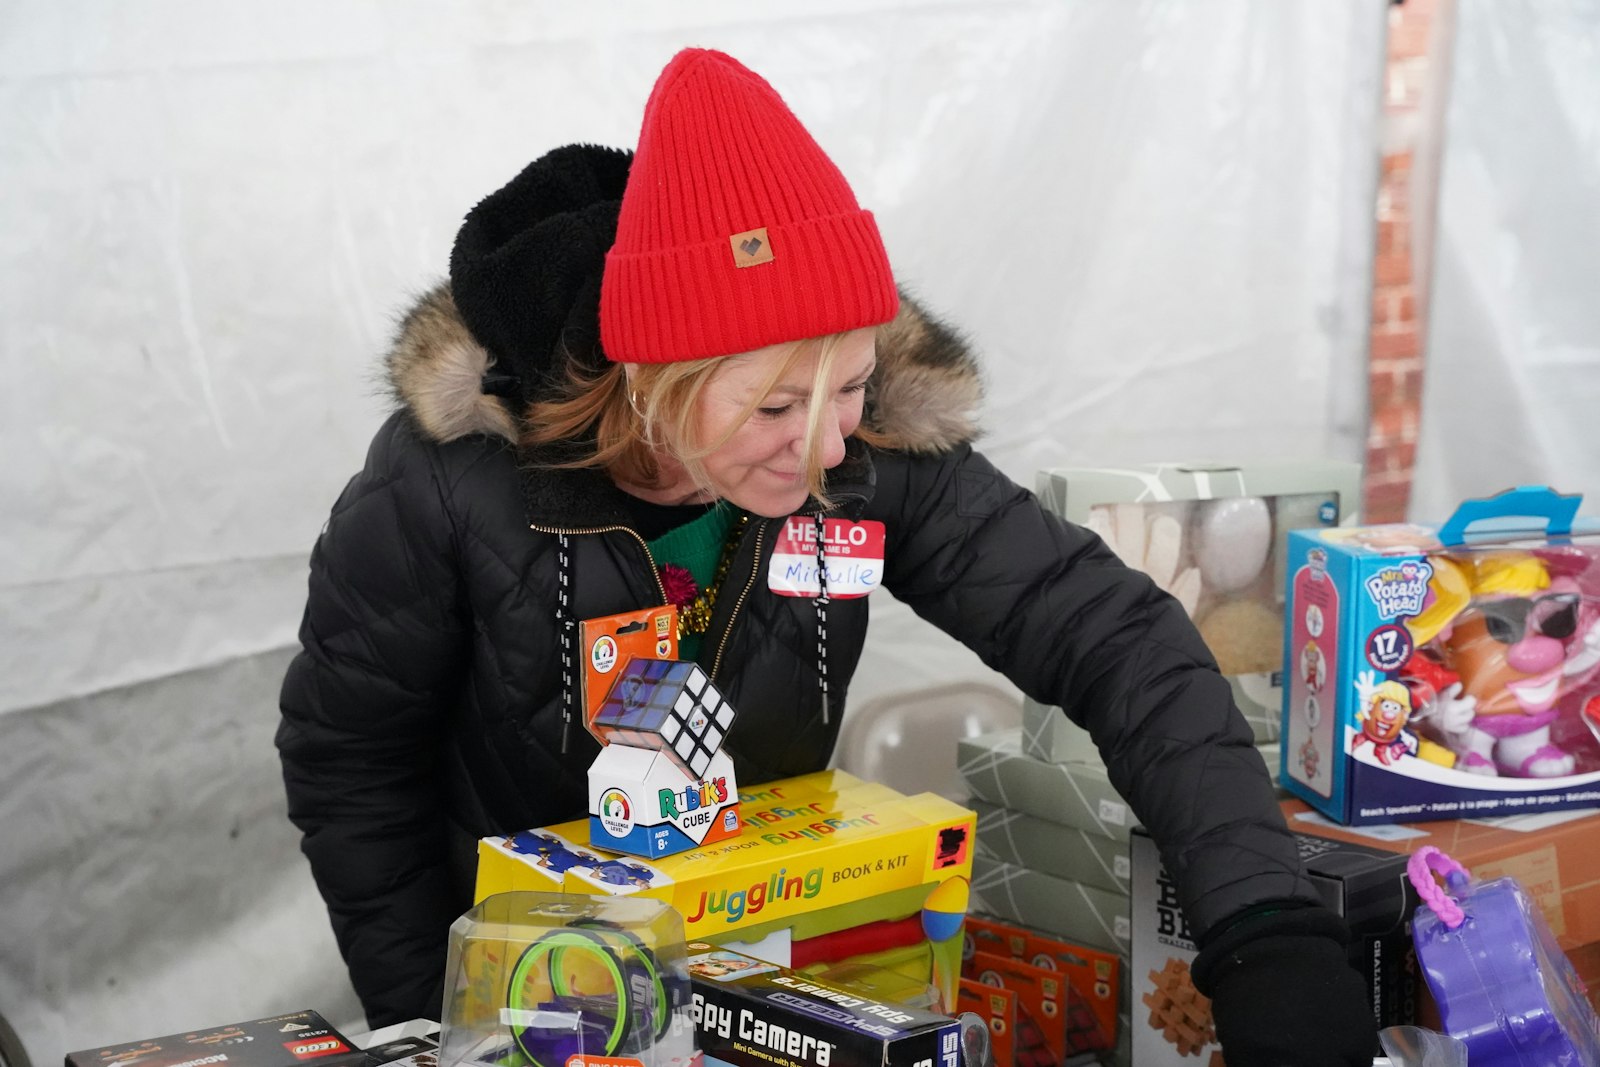 A volunteer organizes gifts available for parents to choose from. Each guest at the Holy Family Christmas Store was paired with a volunteer assistant shopper who guided the guest through the store, helping select items and carrying their items to the car.